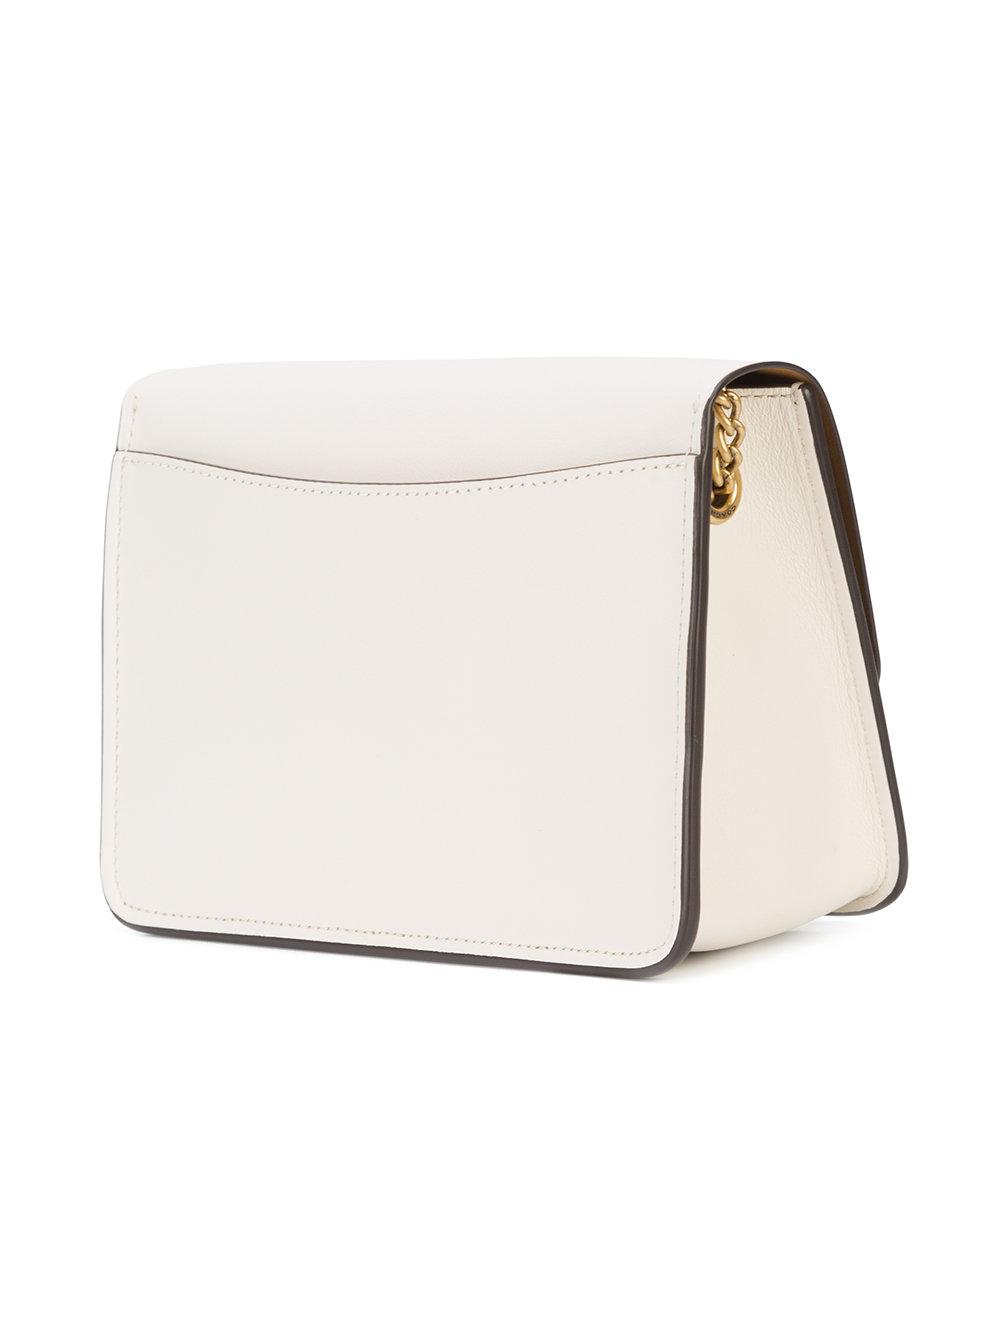 COACH Leather Tea Rose Turnlock Bowery Bag in White - Lyst